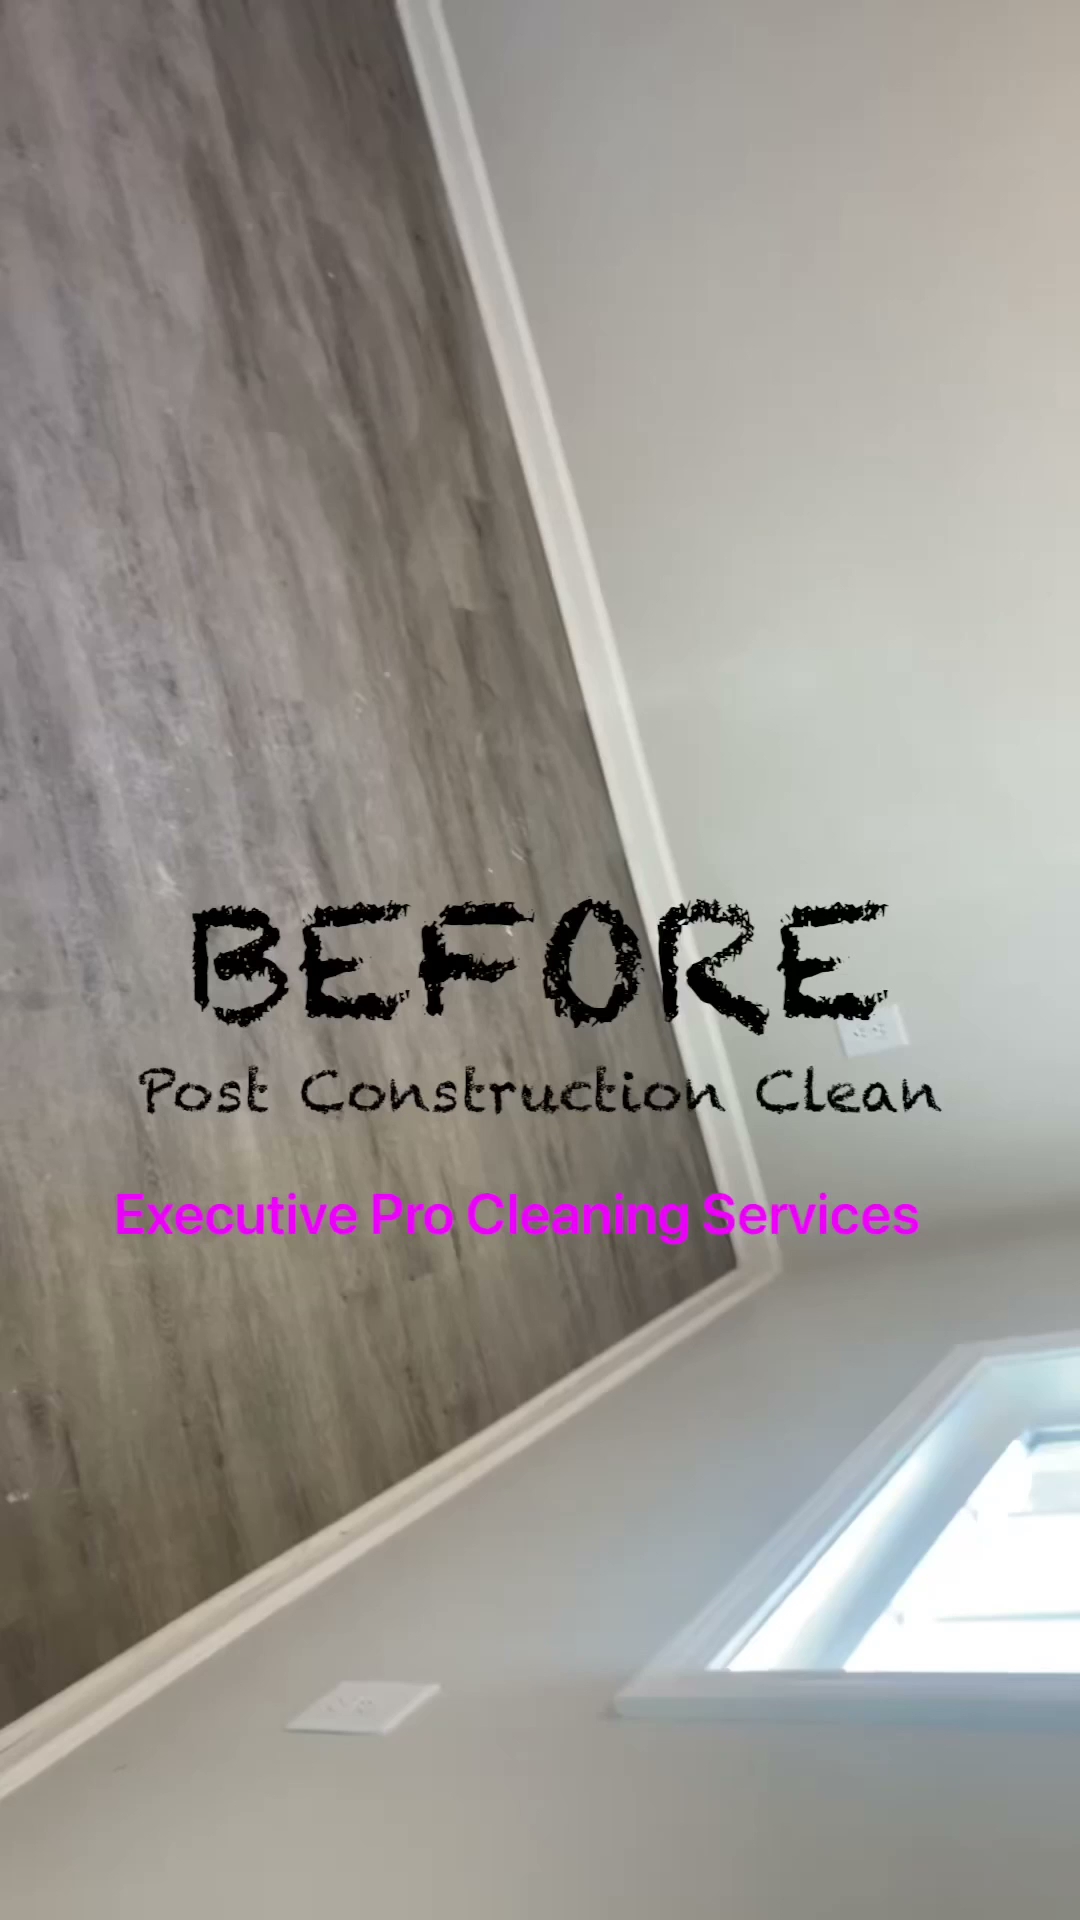 Executive Pro Cleaning Services- Move out/in Home Residential and Post Construction Cleaning